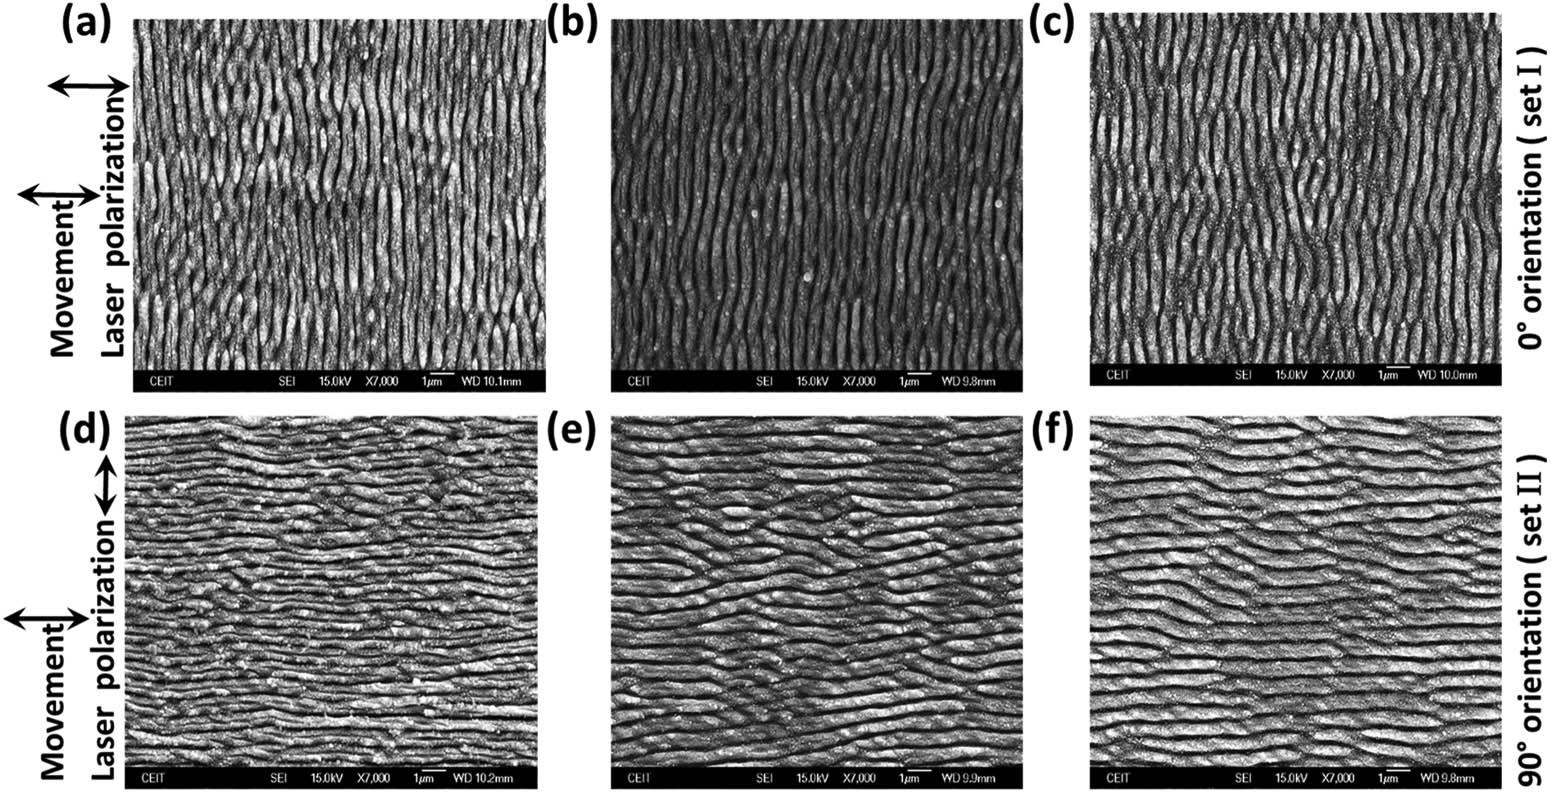 SEM images for quasi-sinusoidal LIPSS fabricated on top of a steel substrate using femtosecond laser processing. The polarization state of the laser beam is parallel to the direction of the movement during the sample processing for (a)–(c) subplots and perpendicular for (d)–(f).